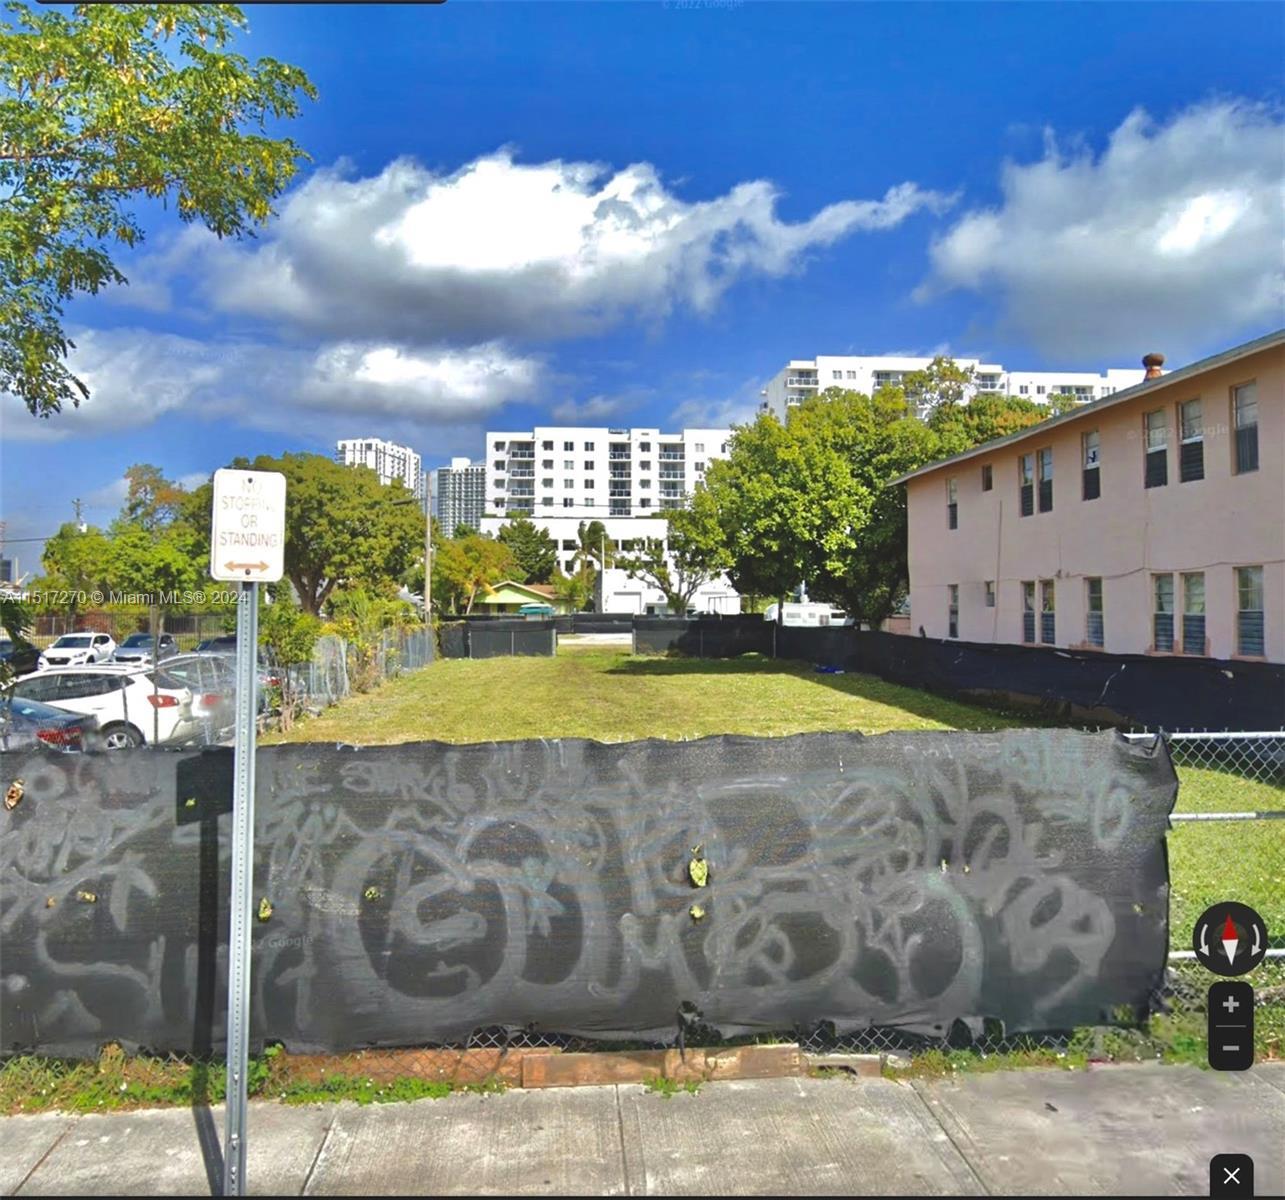 HEART OF EDGEWATER ONE BLK OF BISCAYNE BLVD,7380 SQ FT LAND, ADJACENT TO 2 LOTS 130 & 138, TOTAL 21,